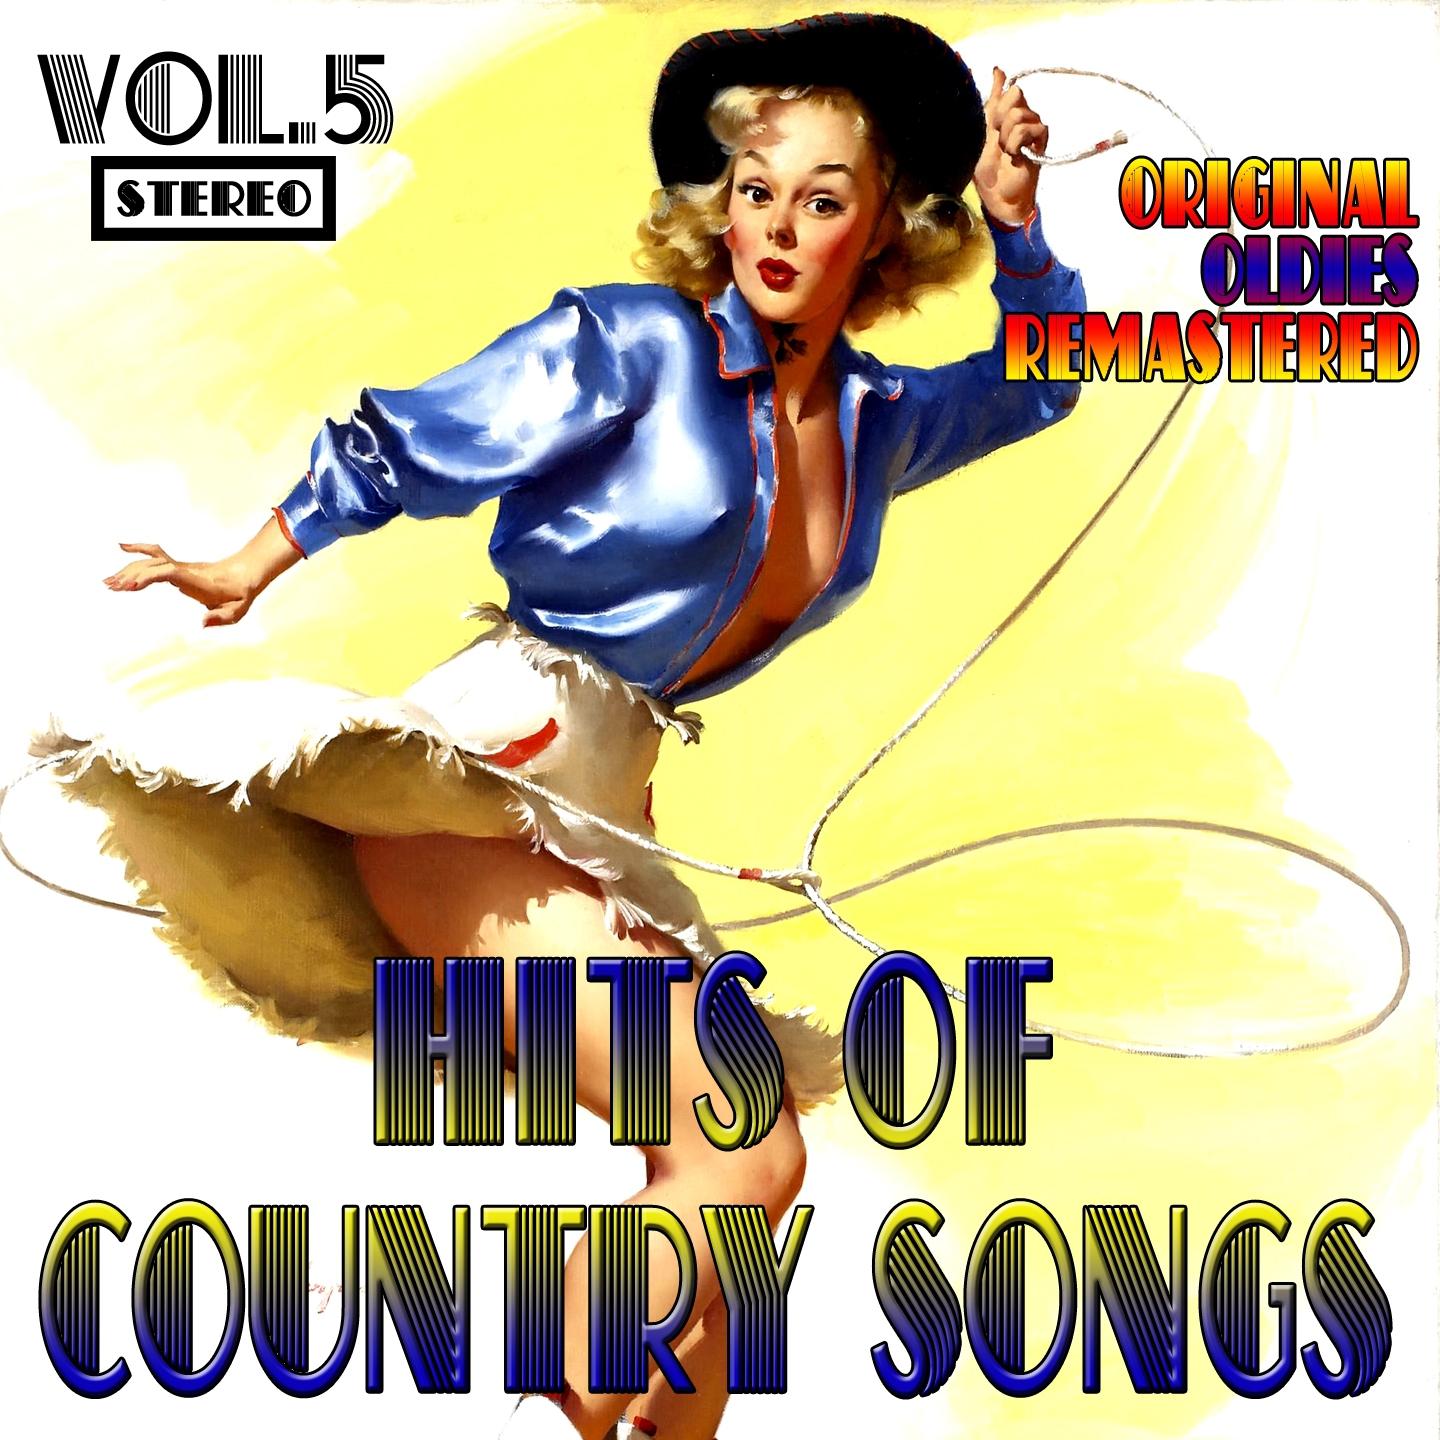 Hits of Country Songs, Vol. 5 (Original Oldies Remastered)